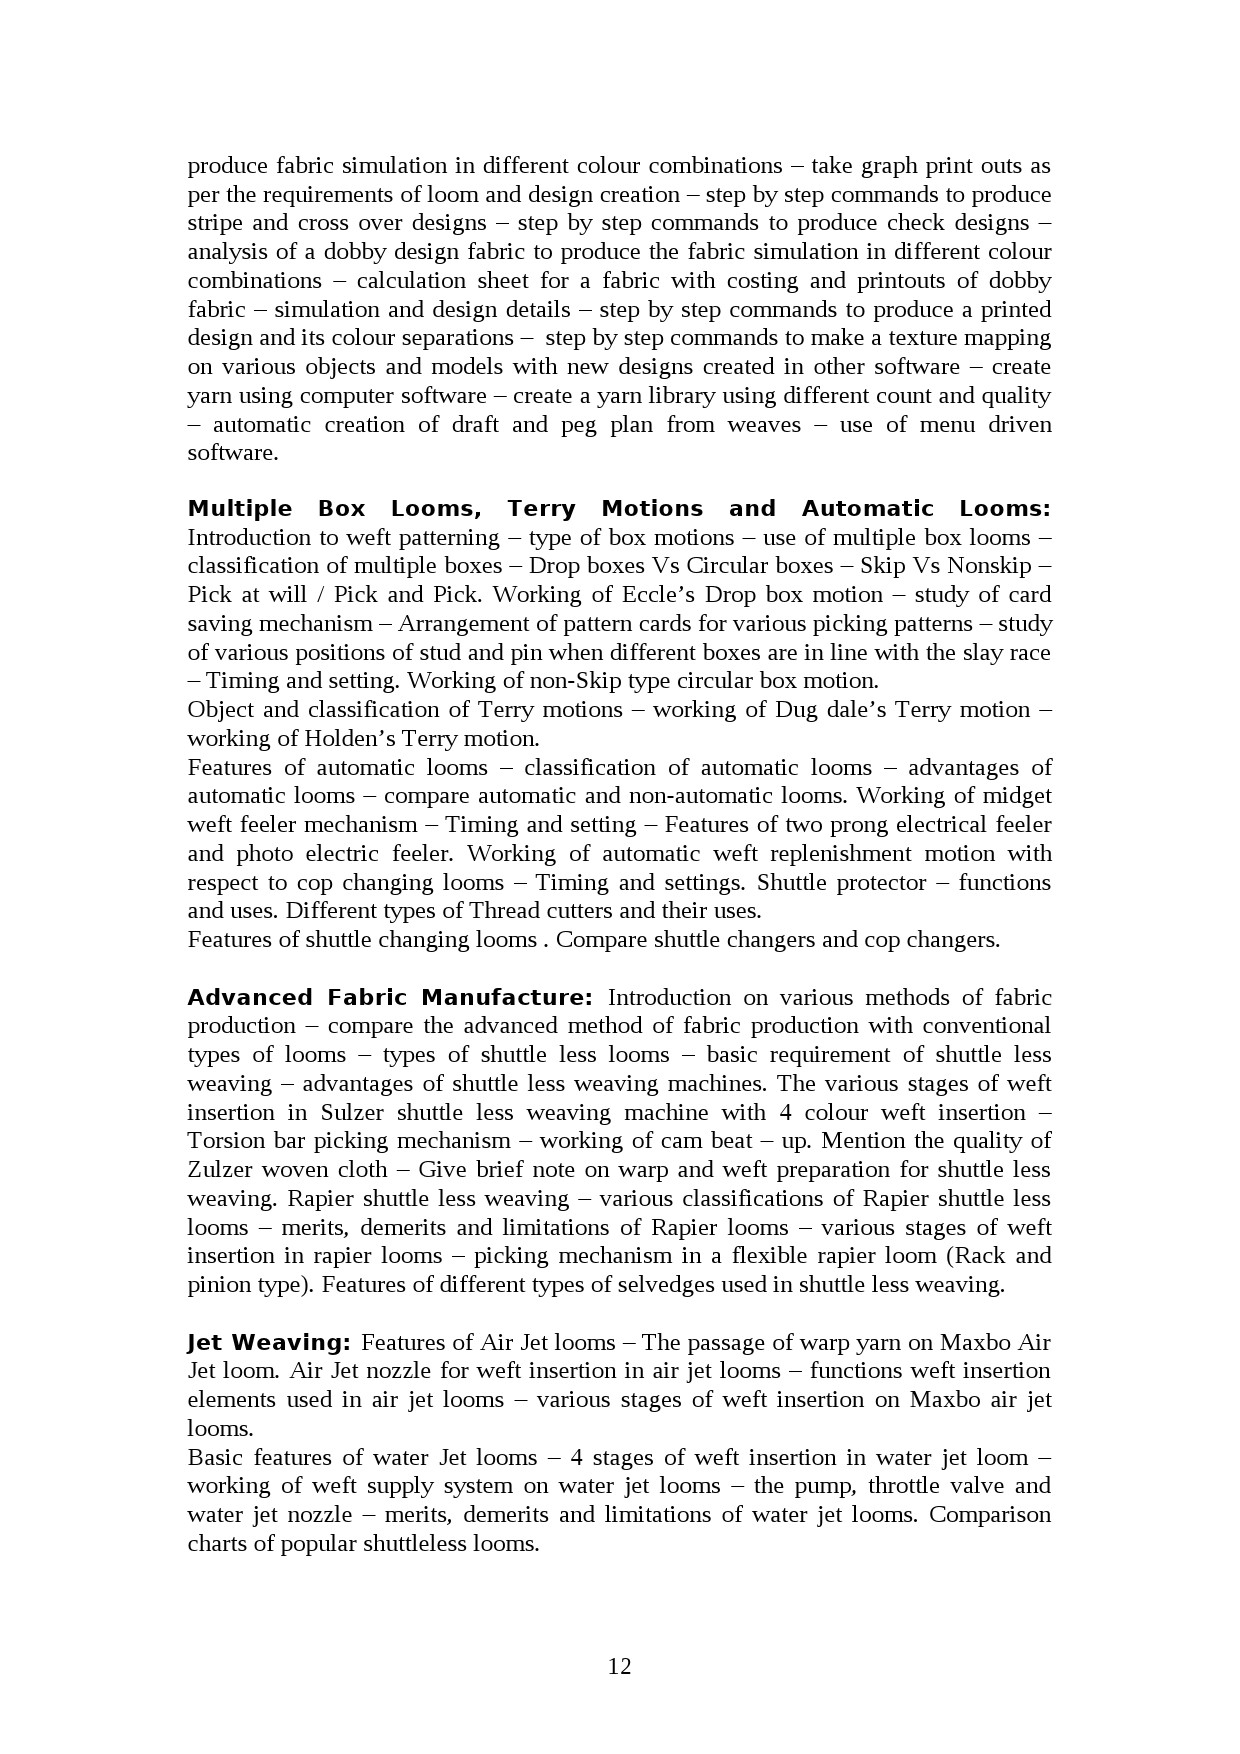 Textile Technology Lecturer in Polytechnic Exam Syllabus - Notification Image 12